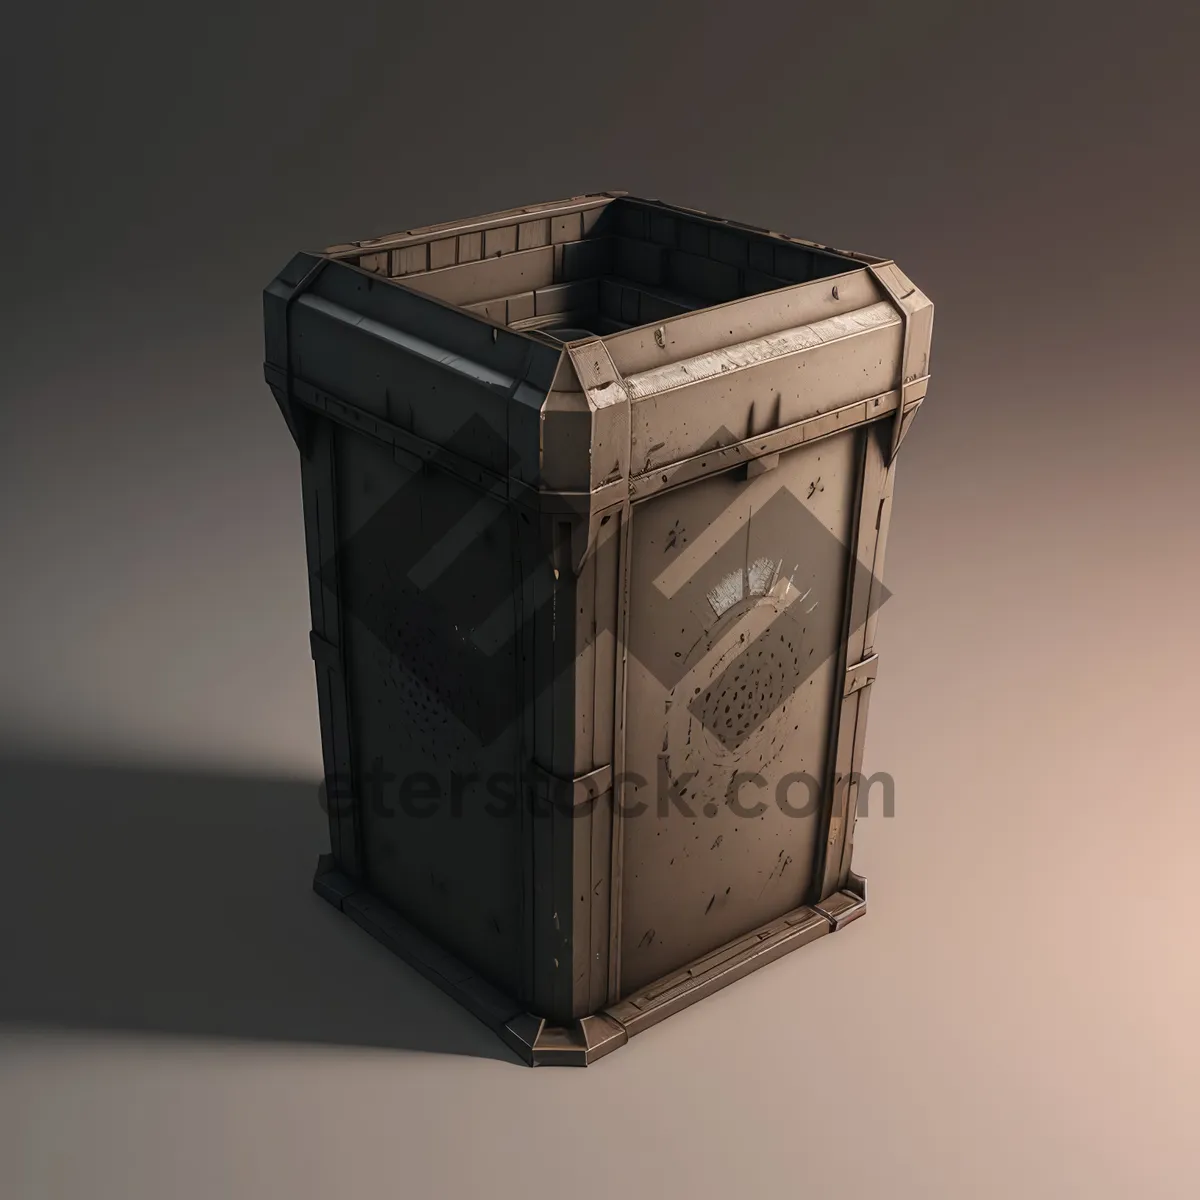 Picture of Container Ashcan Box Bin Object Image